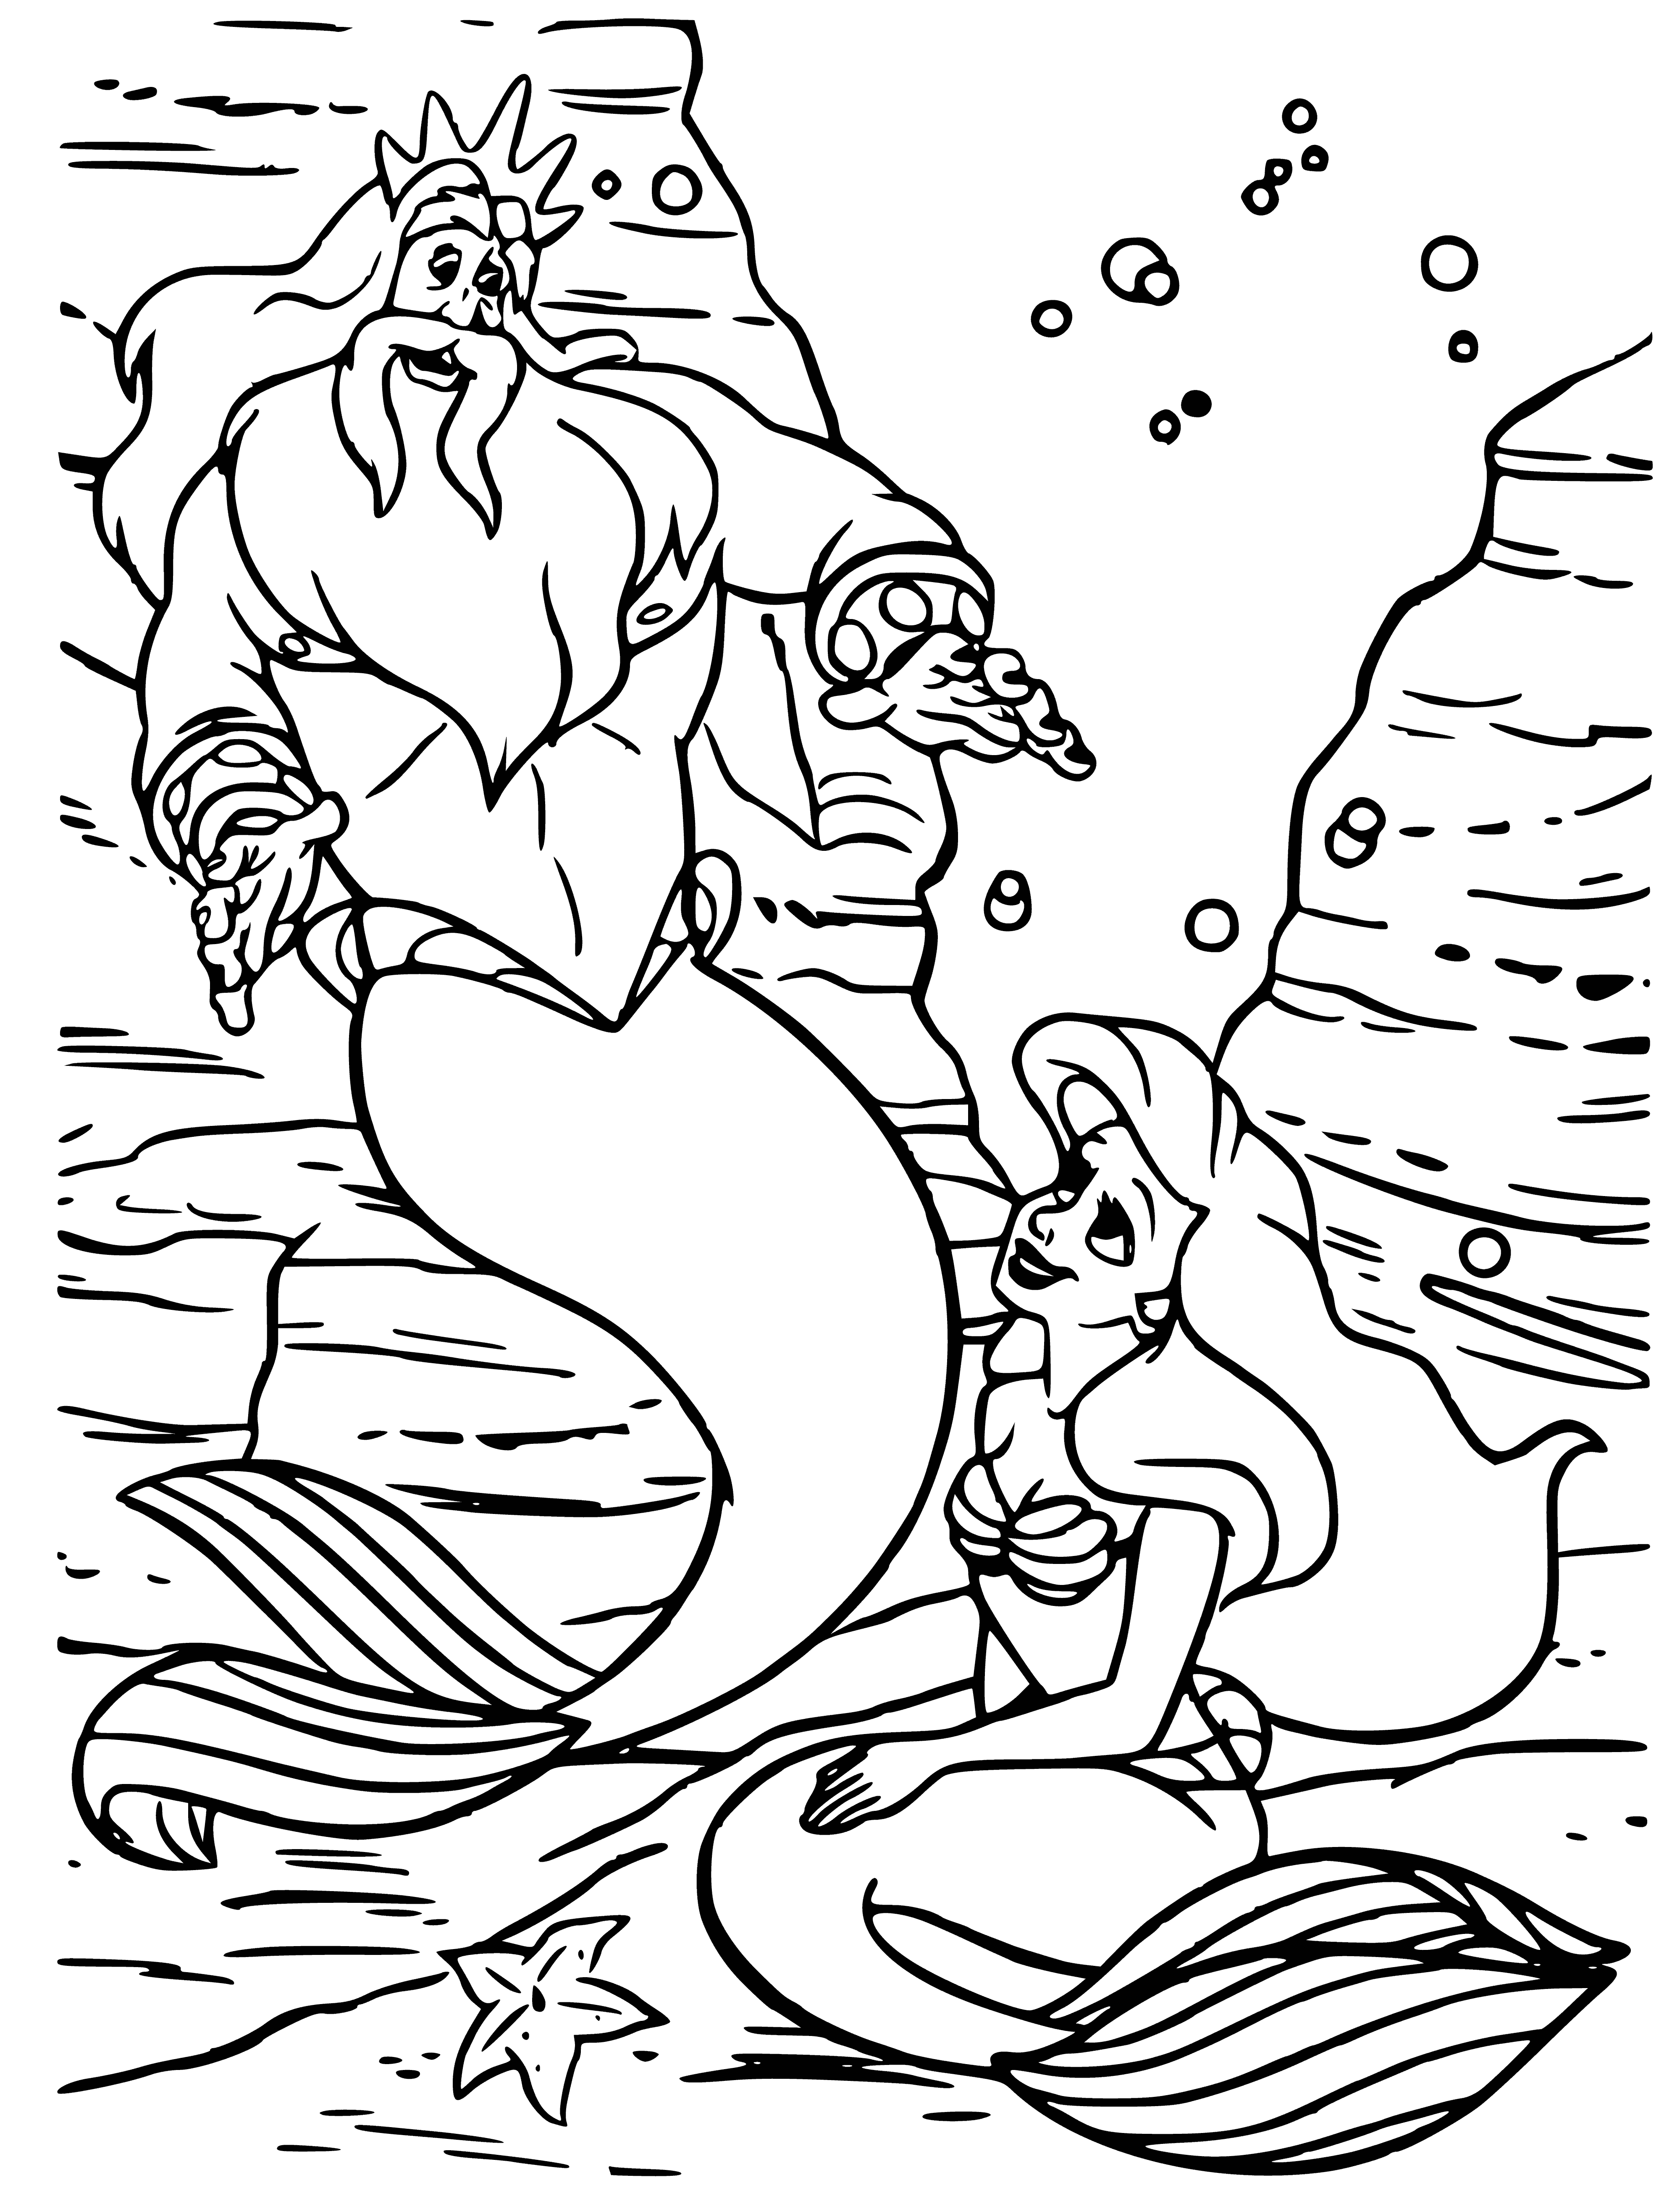 Neptune and Ariel coloring page